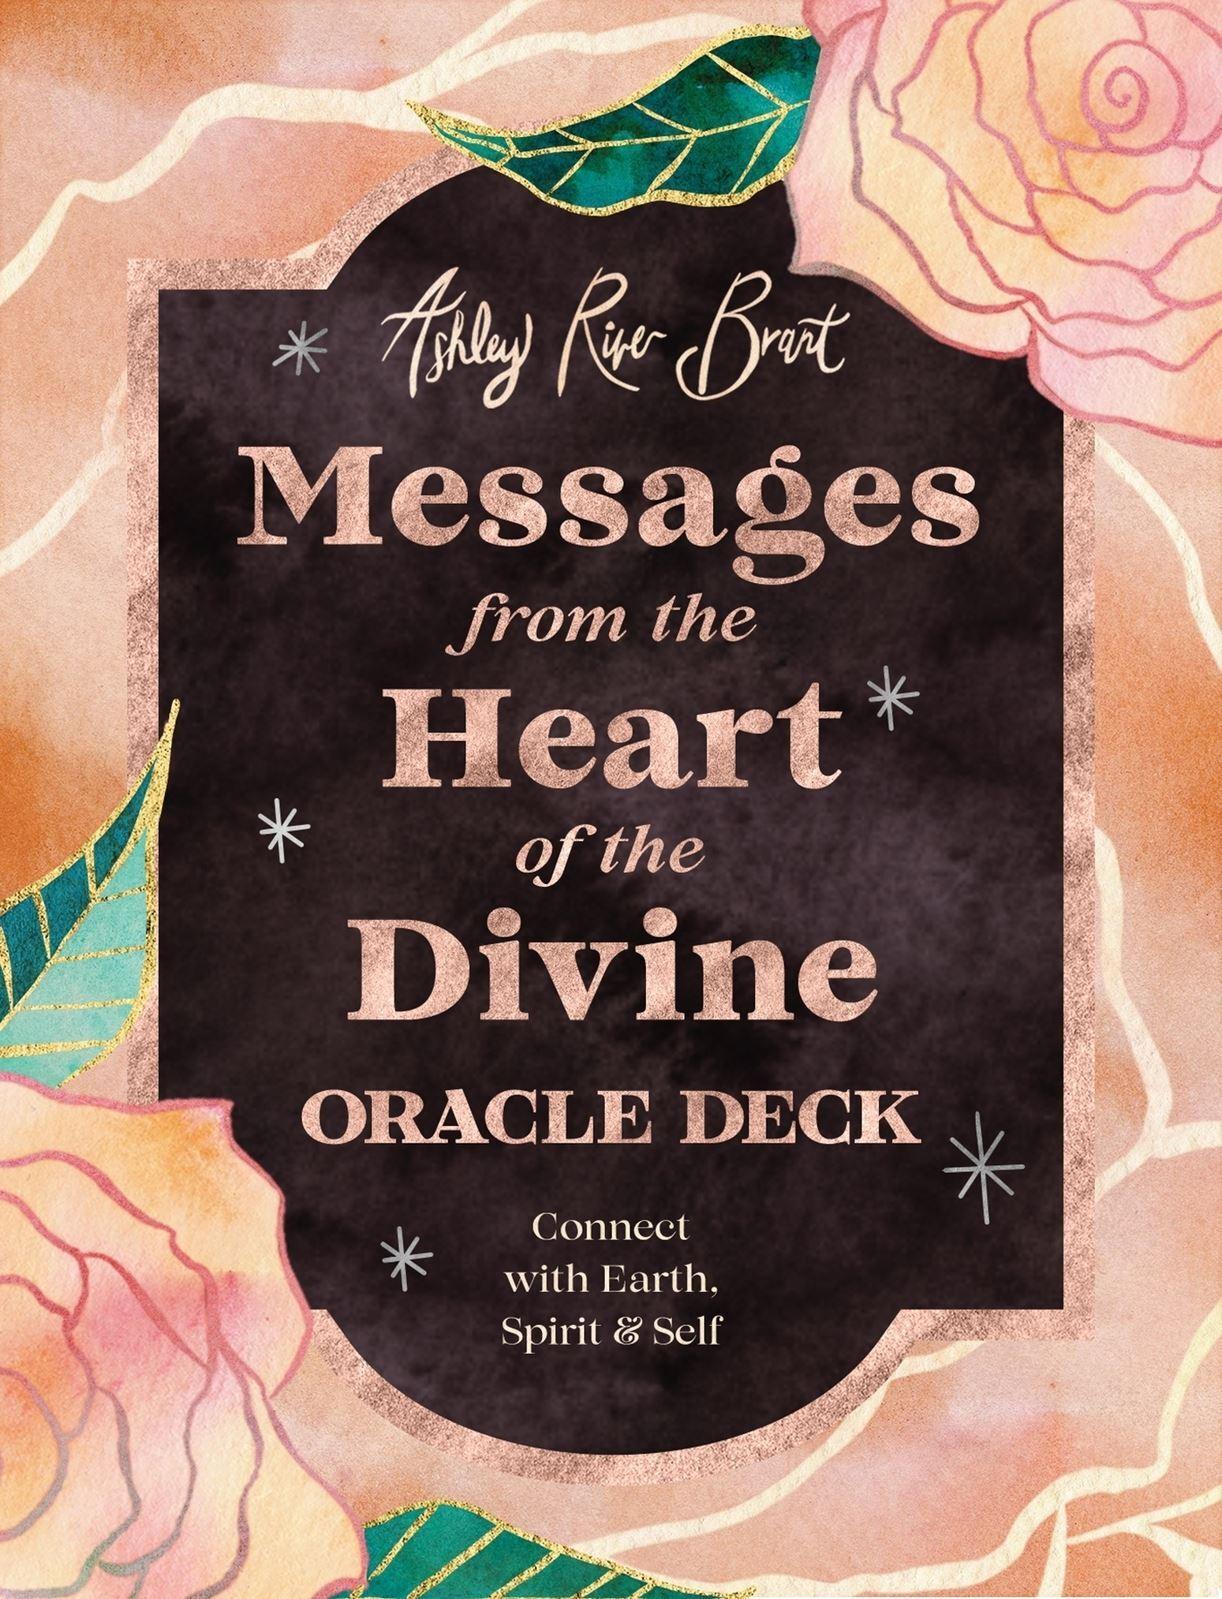 Messages from the Heart of the Divine Oracle Deck: Connect with Earth, Spirit & Self - Inspire Me Naturally 